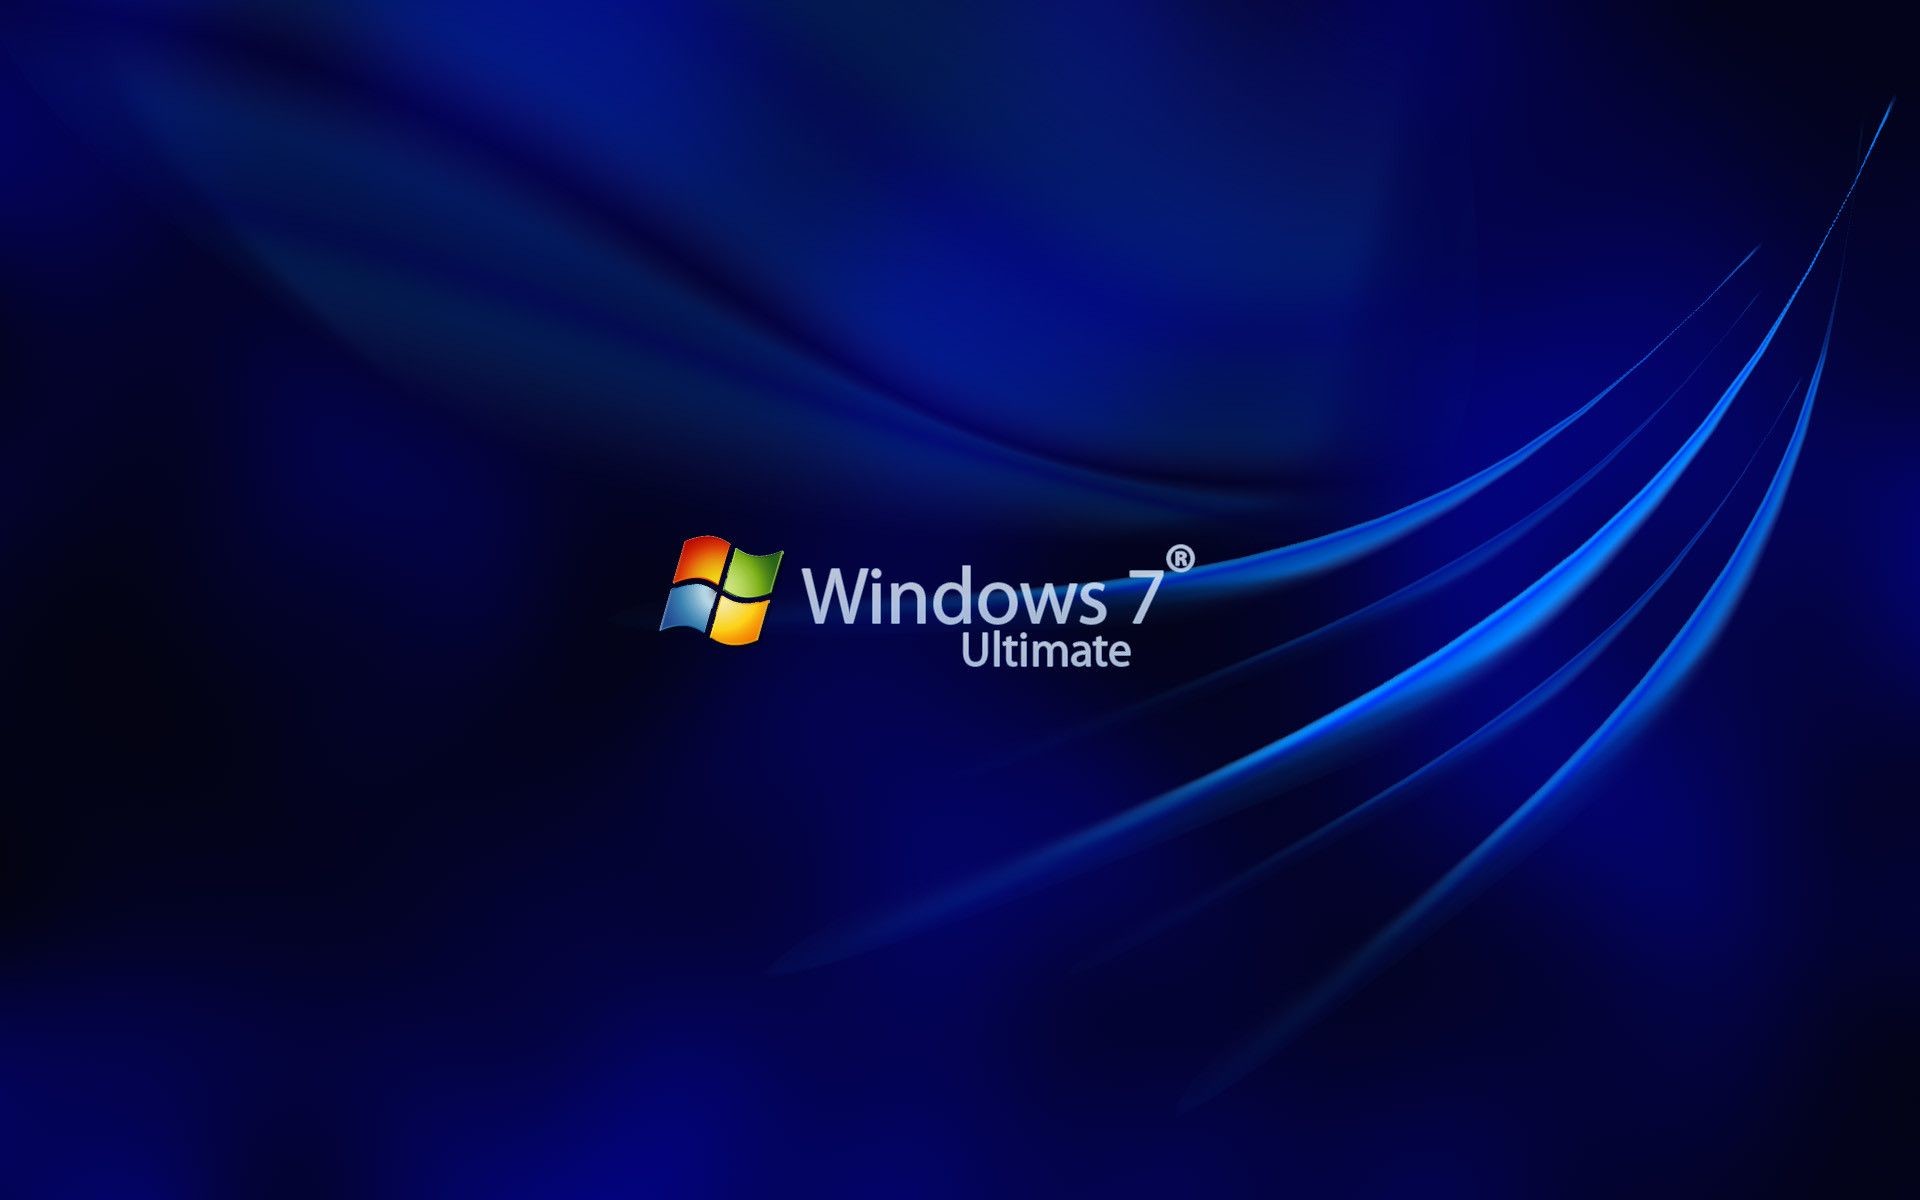 Windows ultimate wallpaper hd pictures